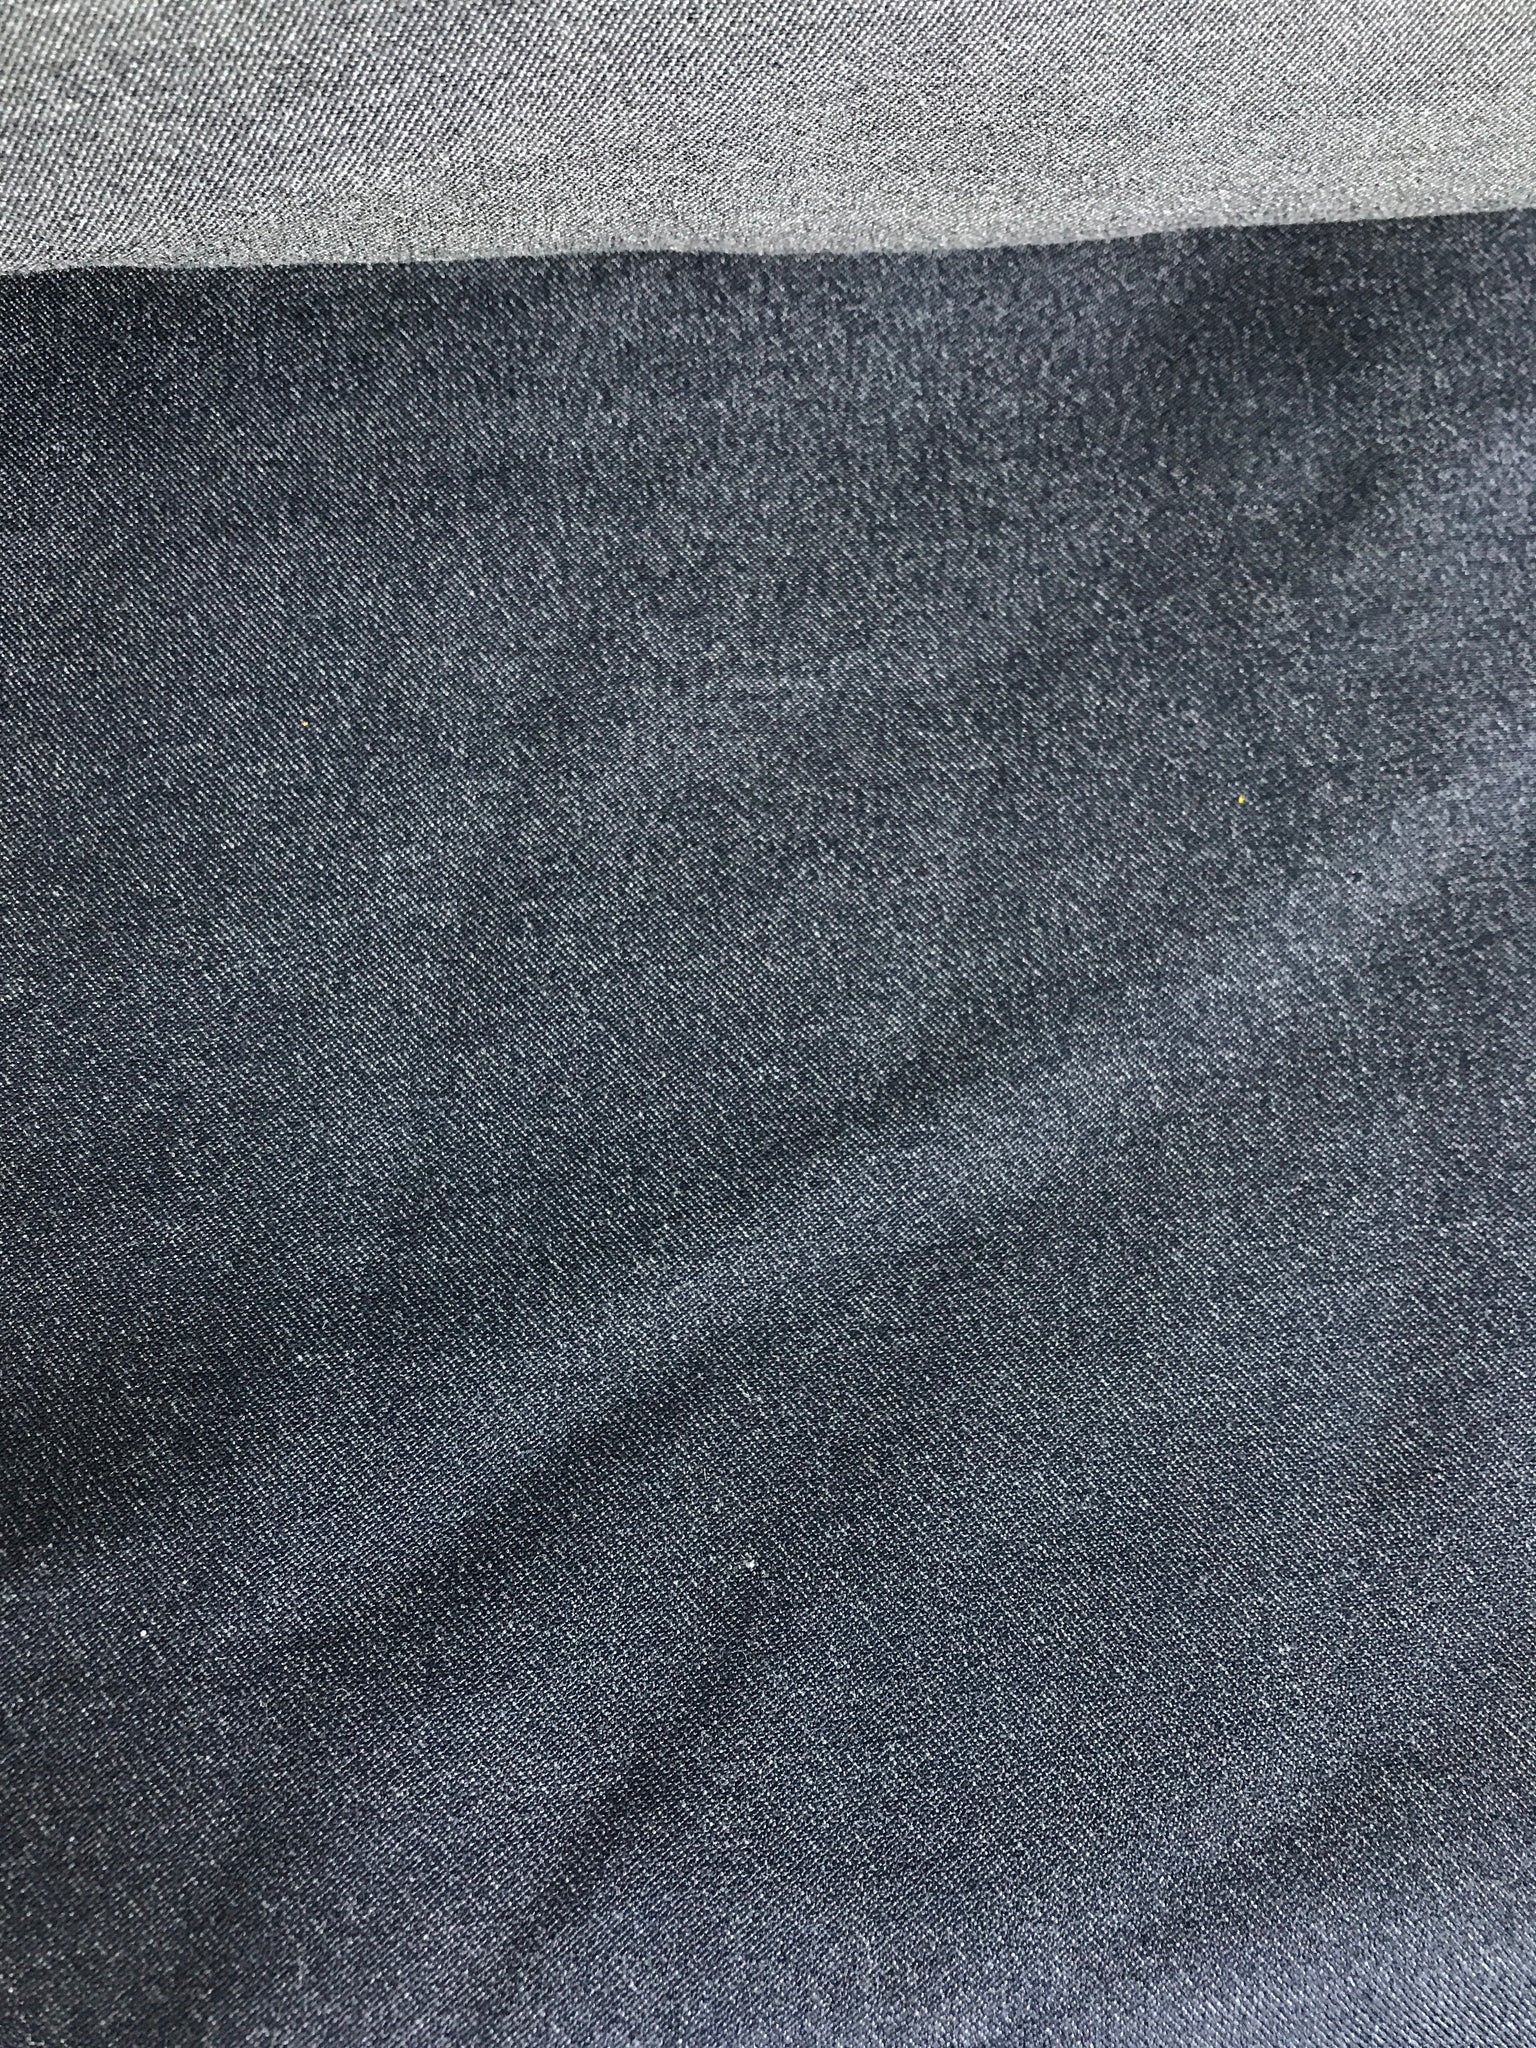 Stretch Denim Fabric, Pattern : Plain, Width : 42 Inches at Best Price in  Ahmedabad